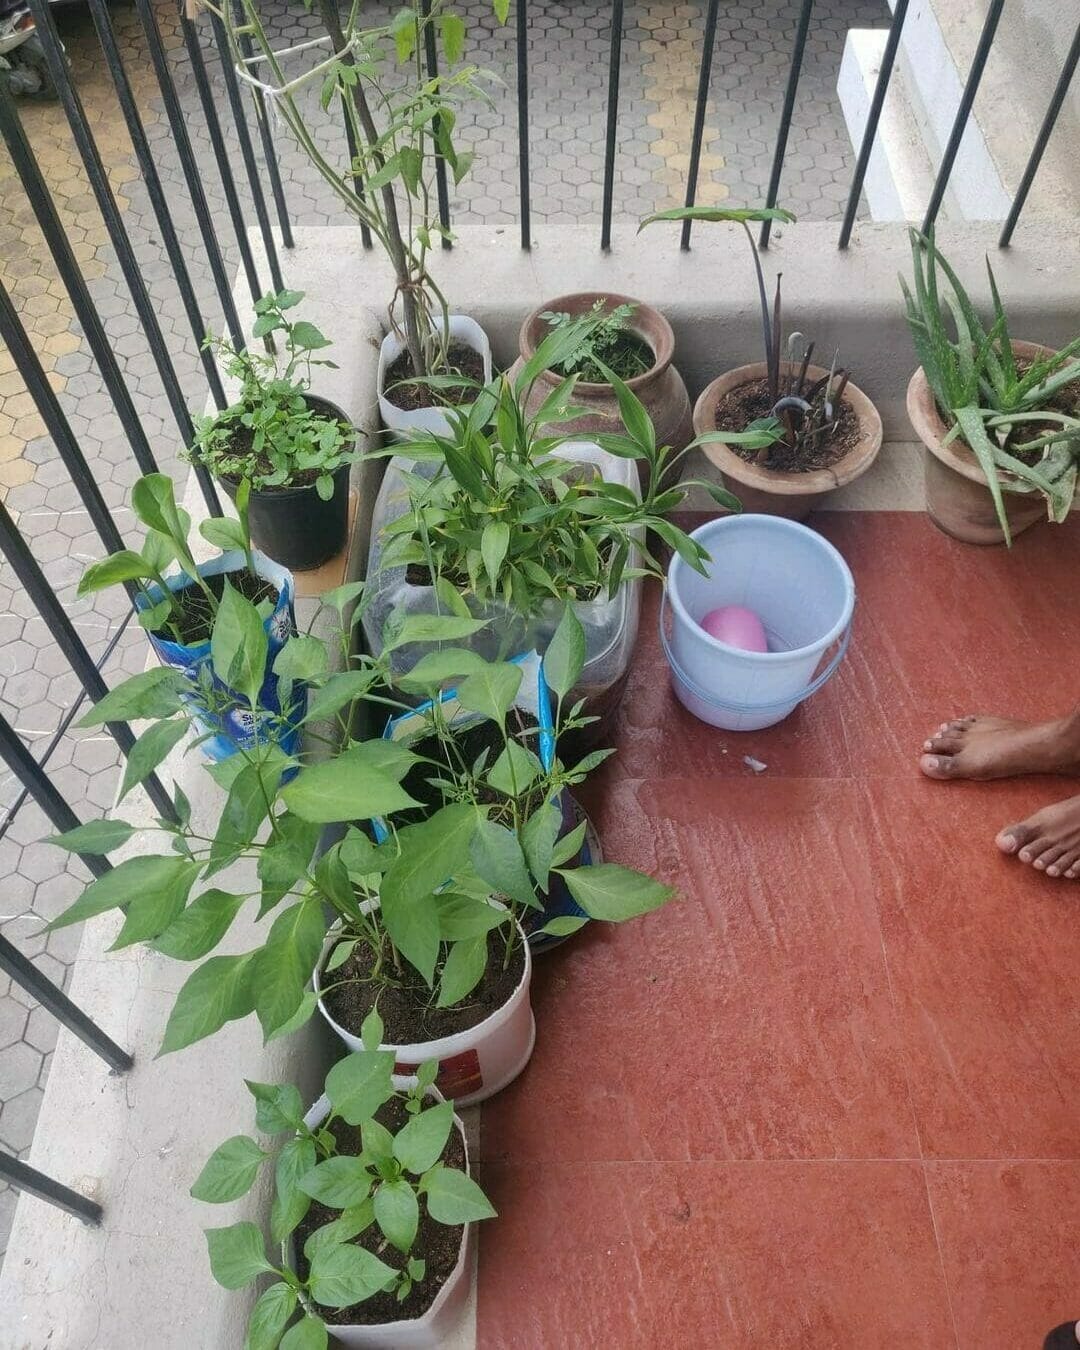 A balcony with pots and plants lined up